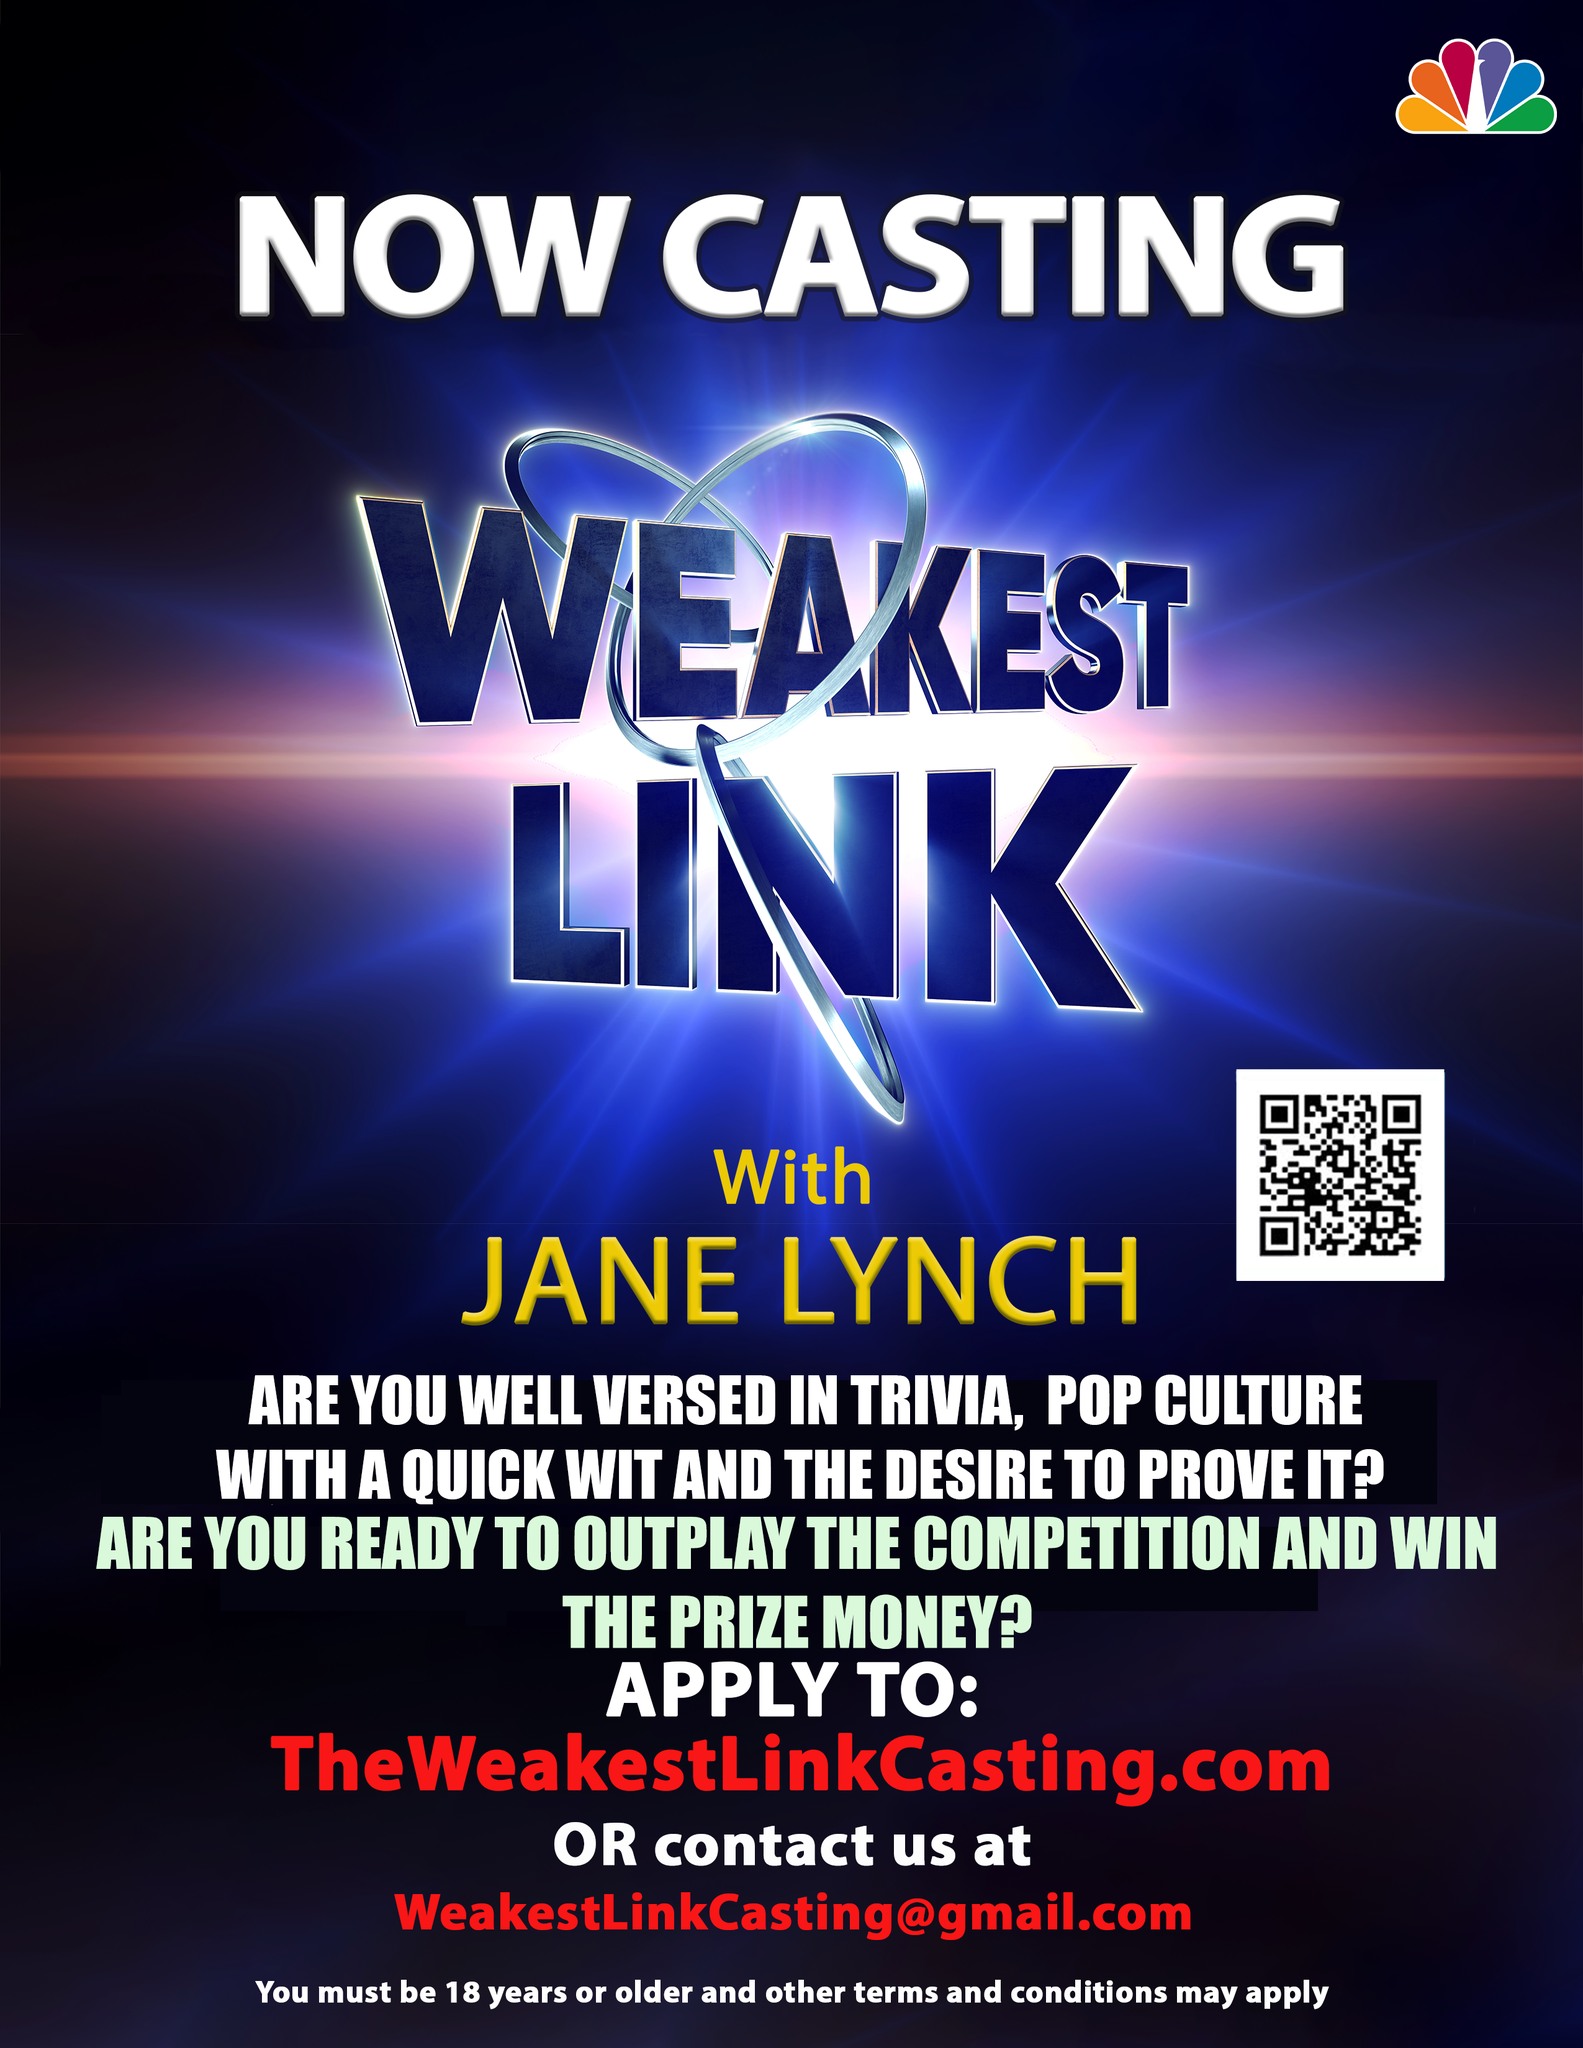 How To Apply For The Weakest Link